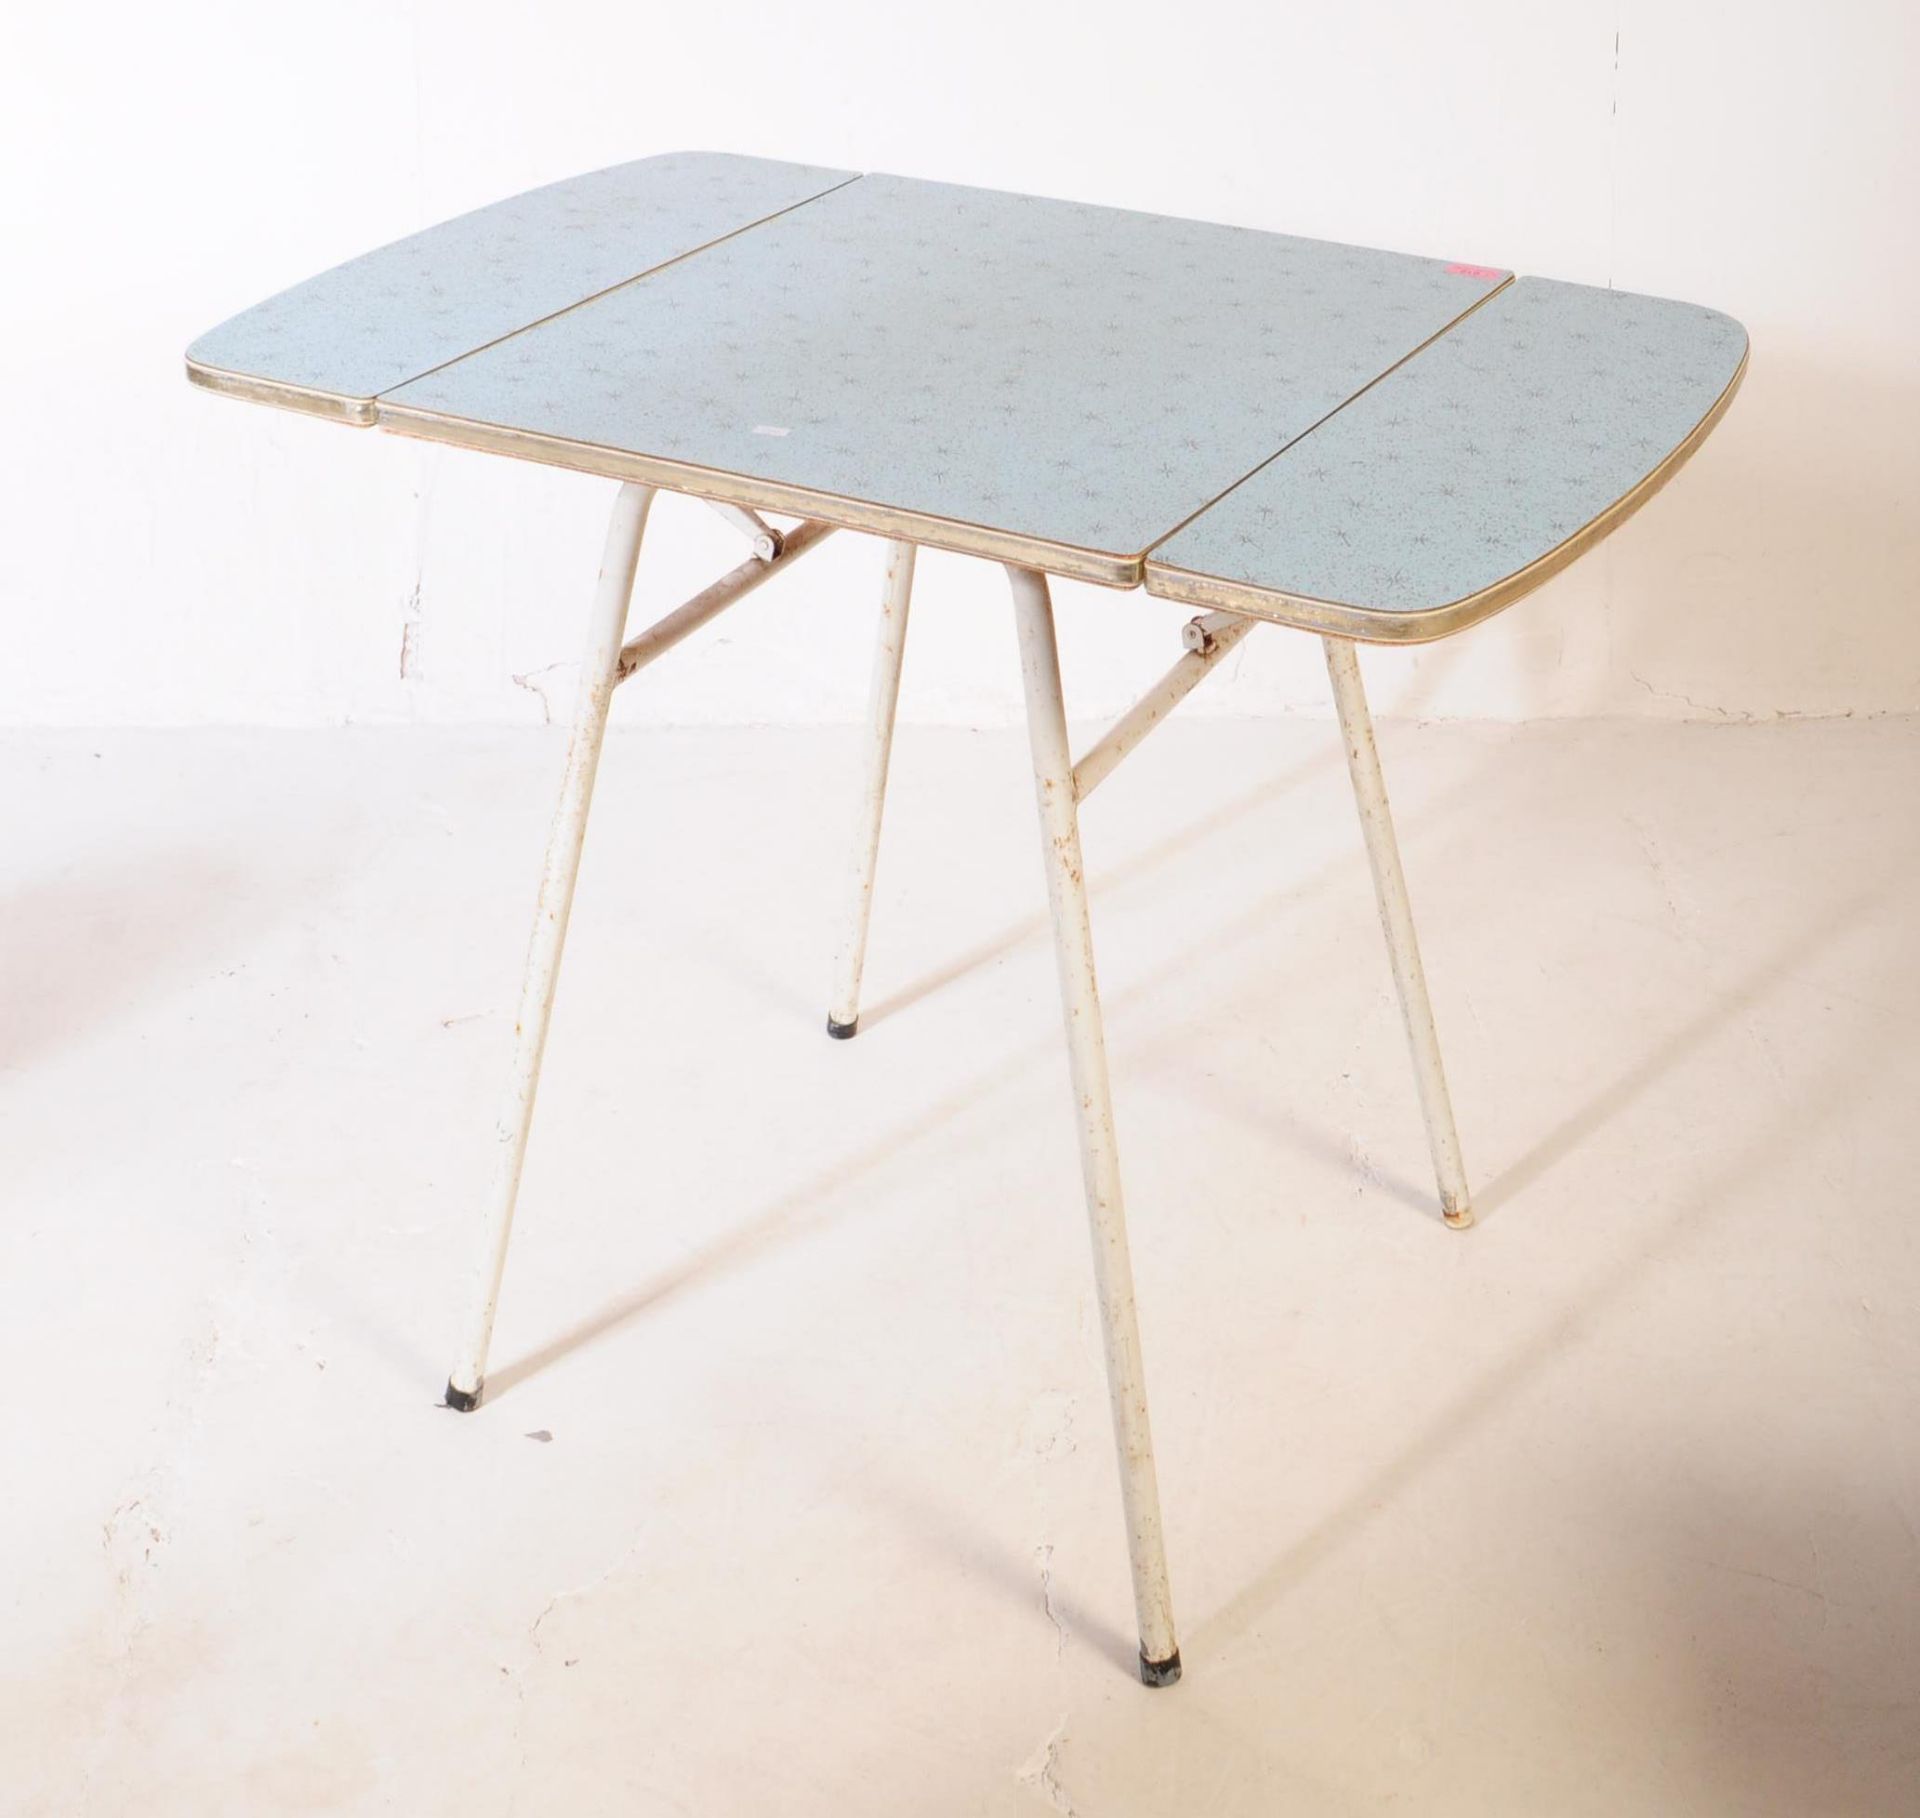 MID CENTURY FORMICA TOPPED TABLE & CHAIRS - Image 2 of 4